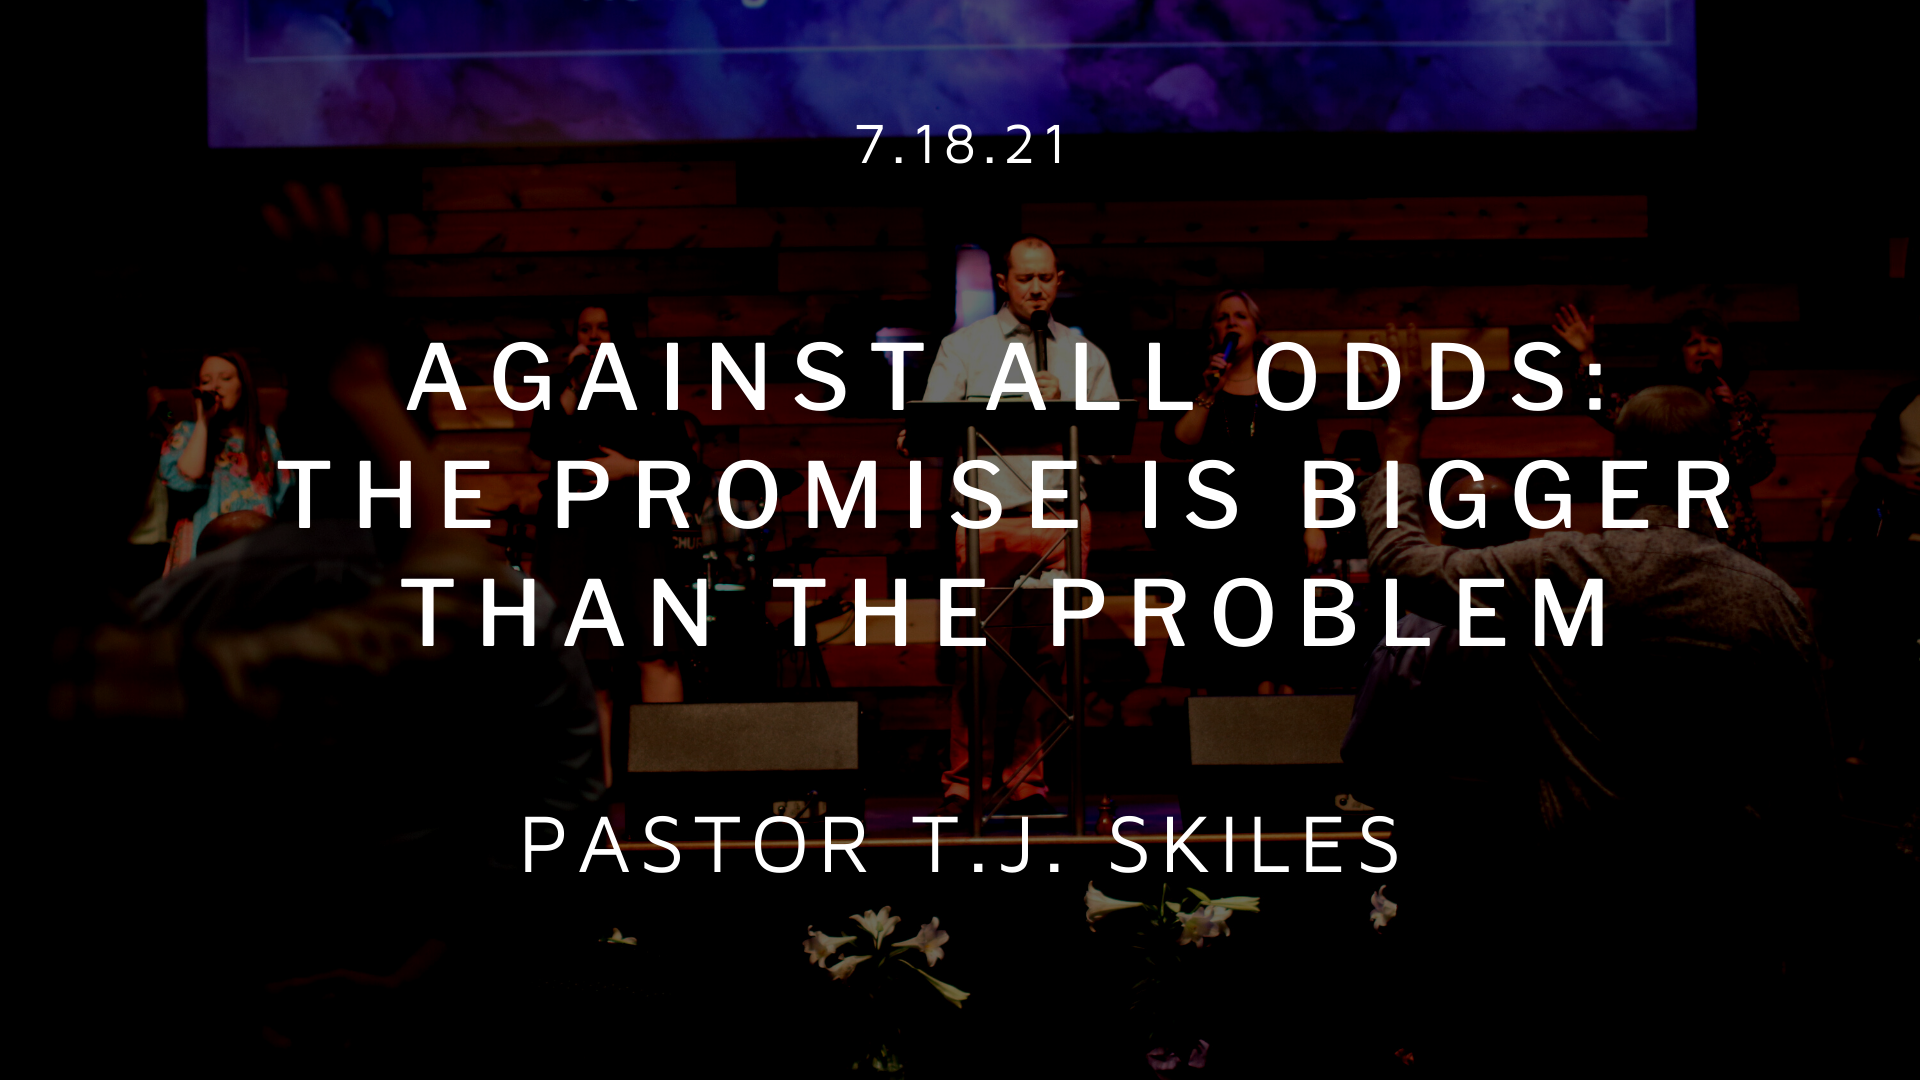 The Promise Is Bigger Than The Problem